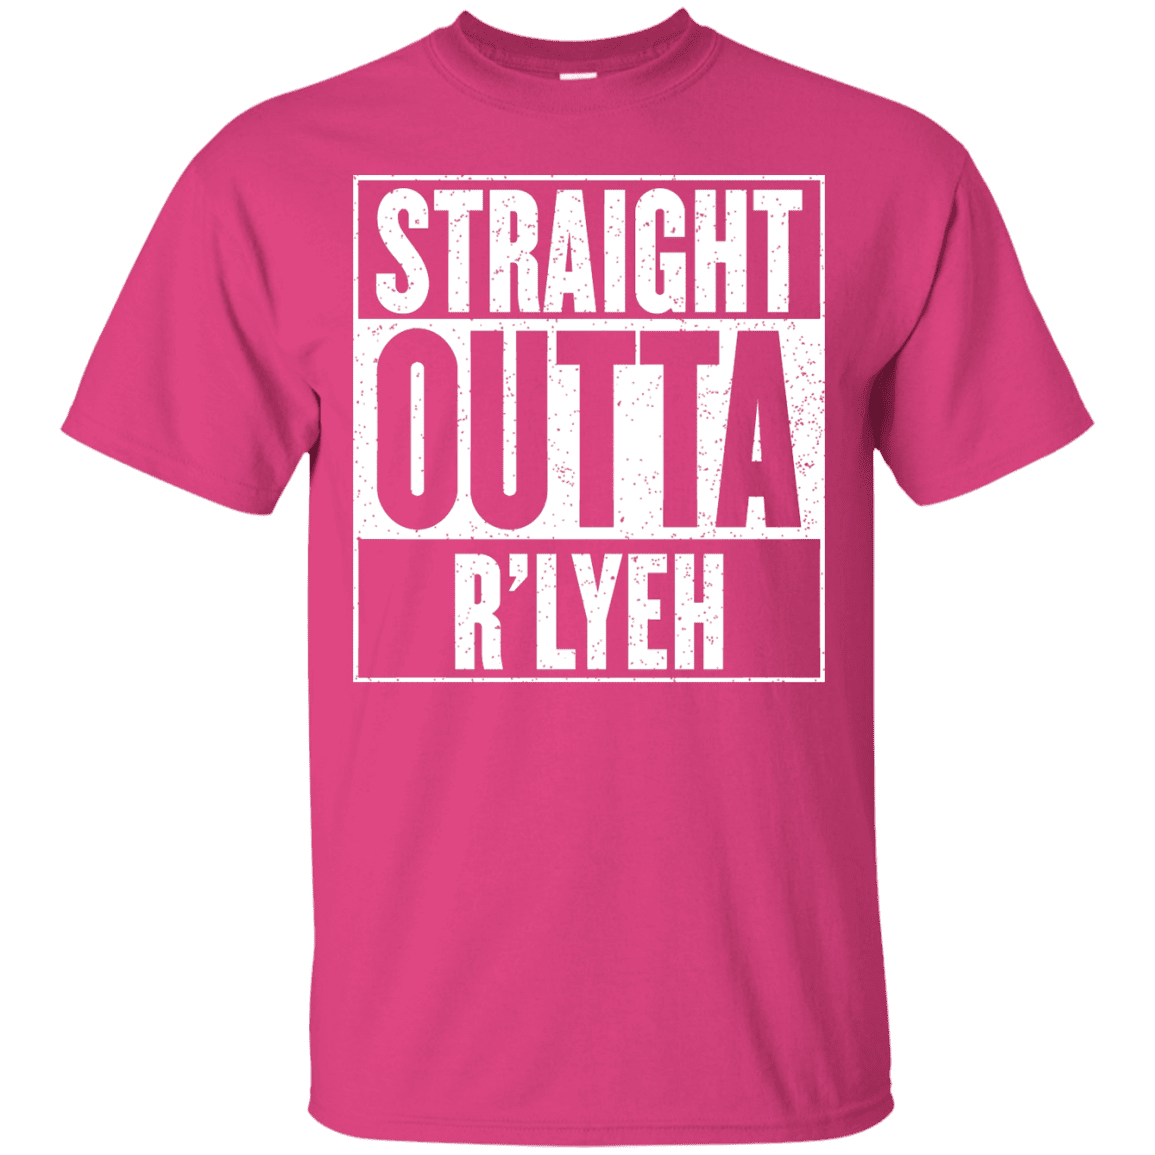 T-Shirts Heliconia / S Straight Outta R'lyeh T-Shirt